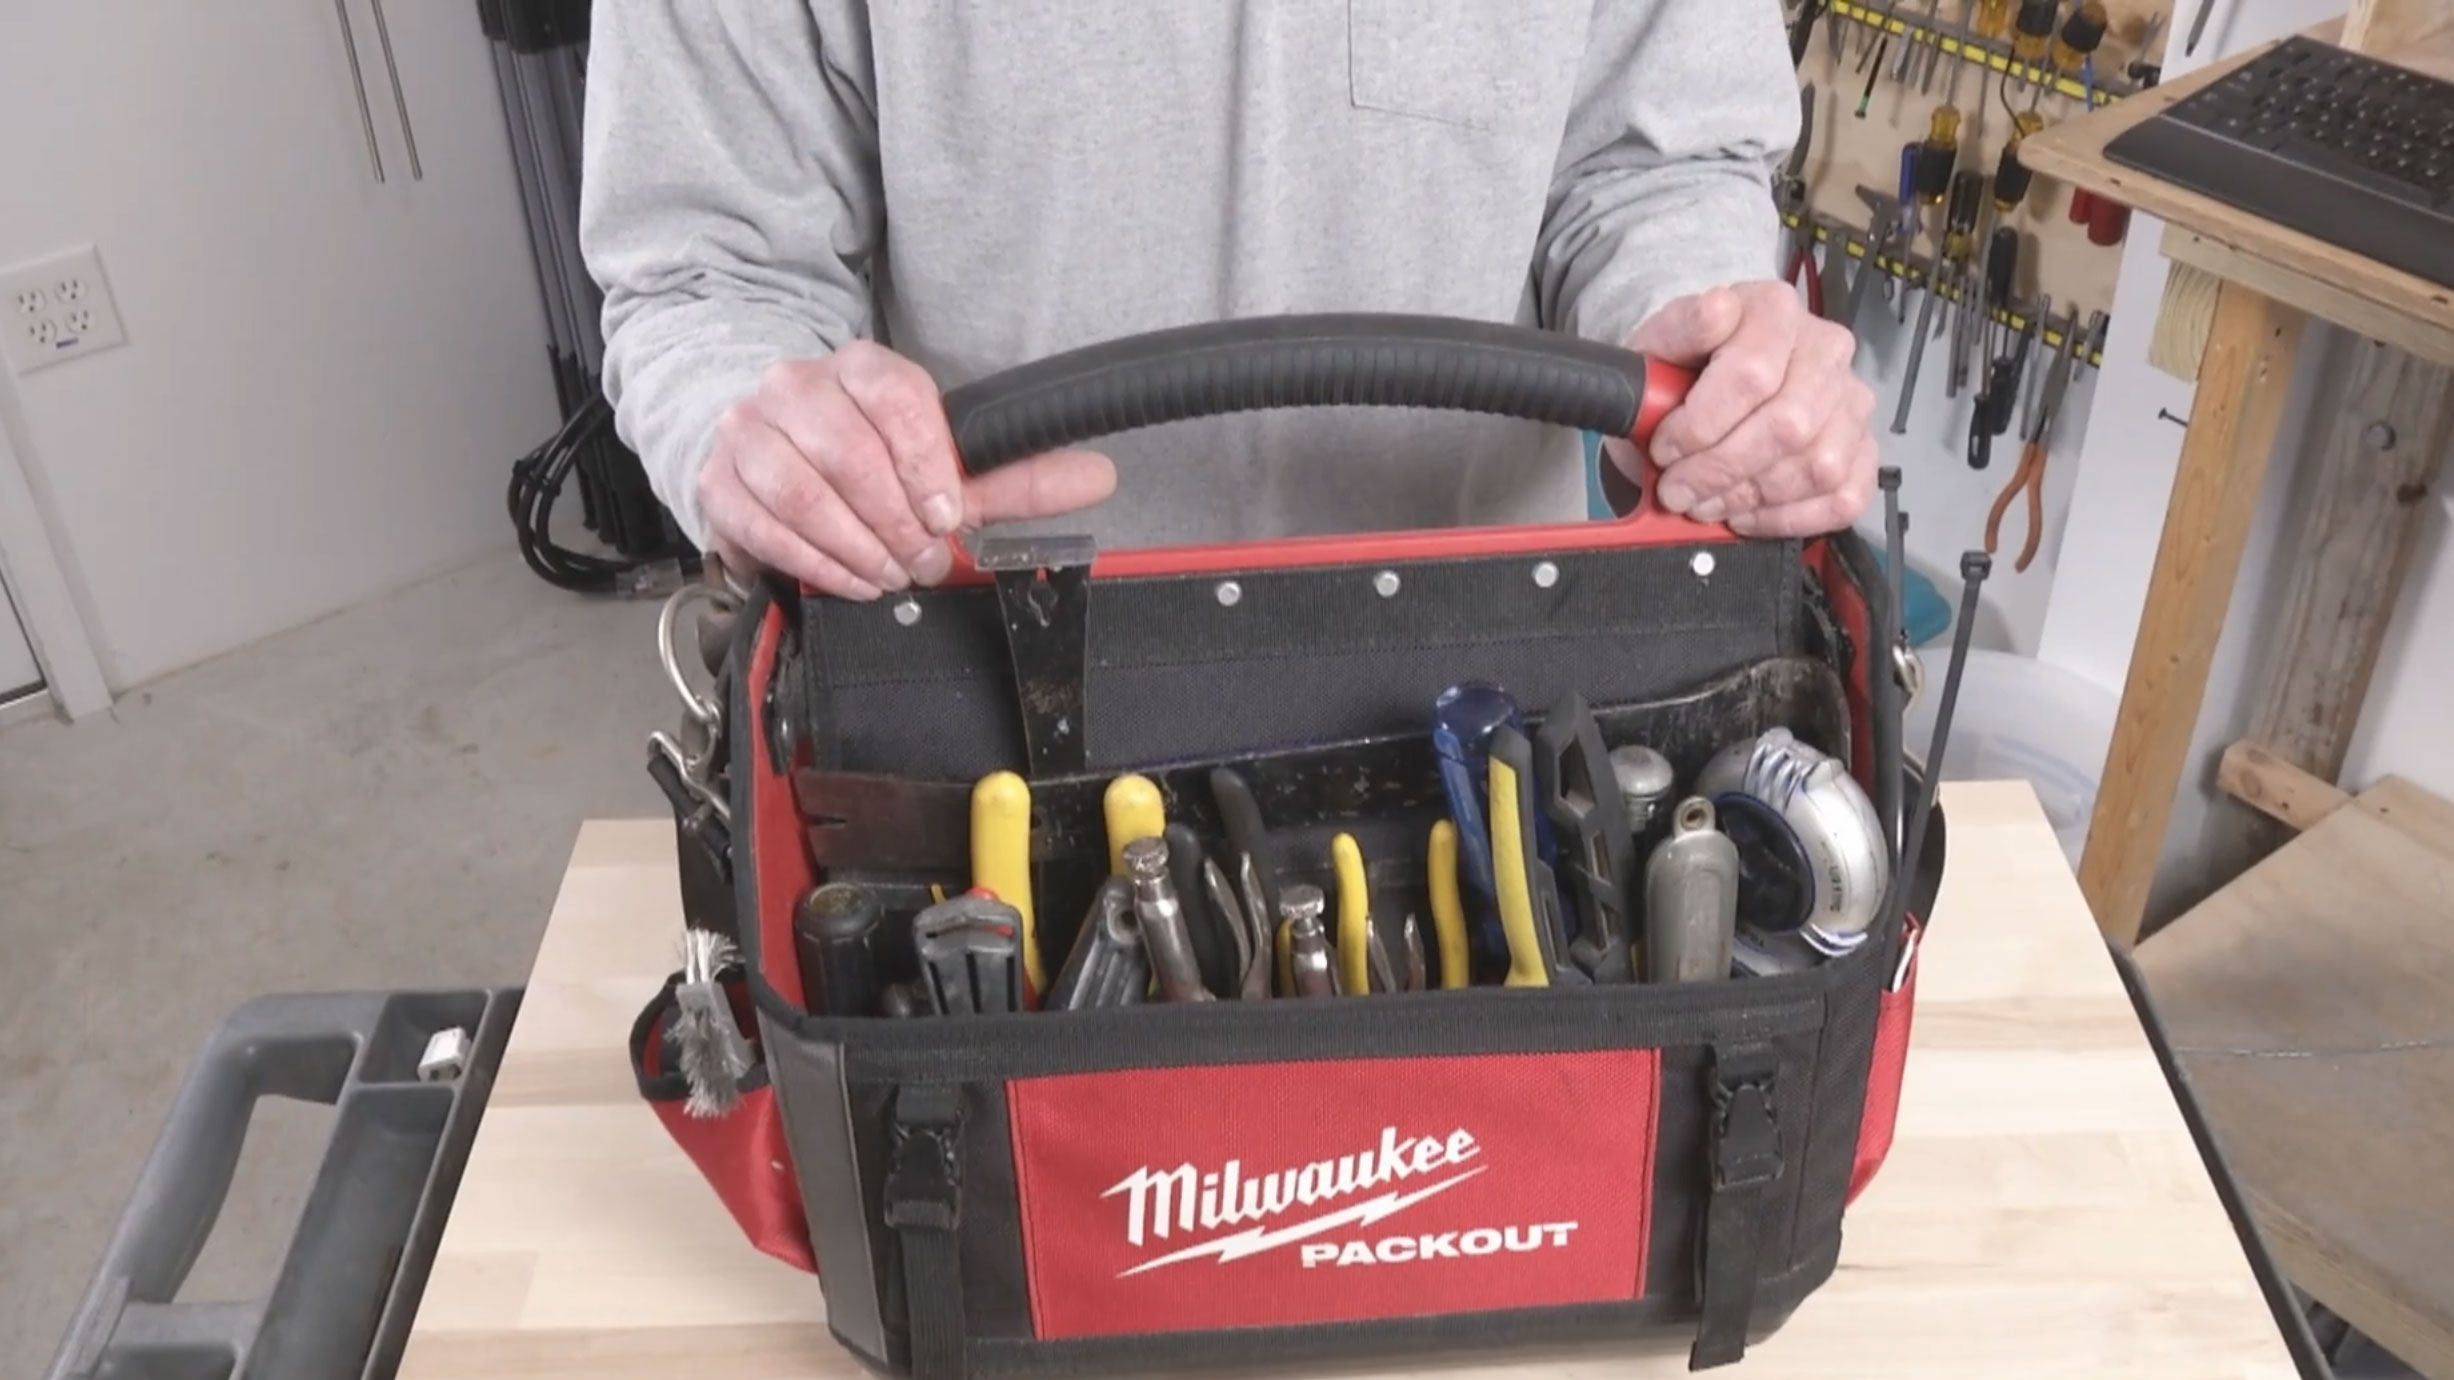 Patrick shows whta tools are in his kit